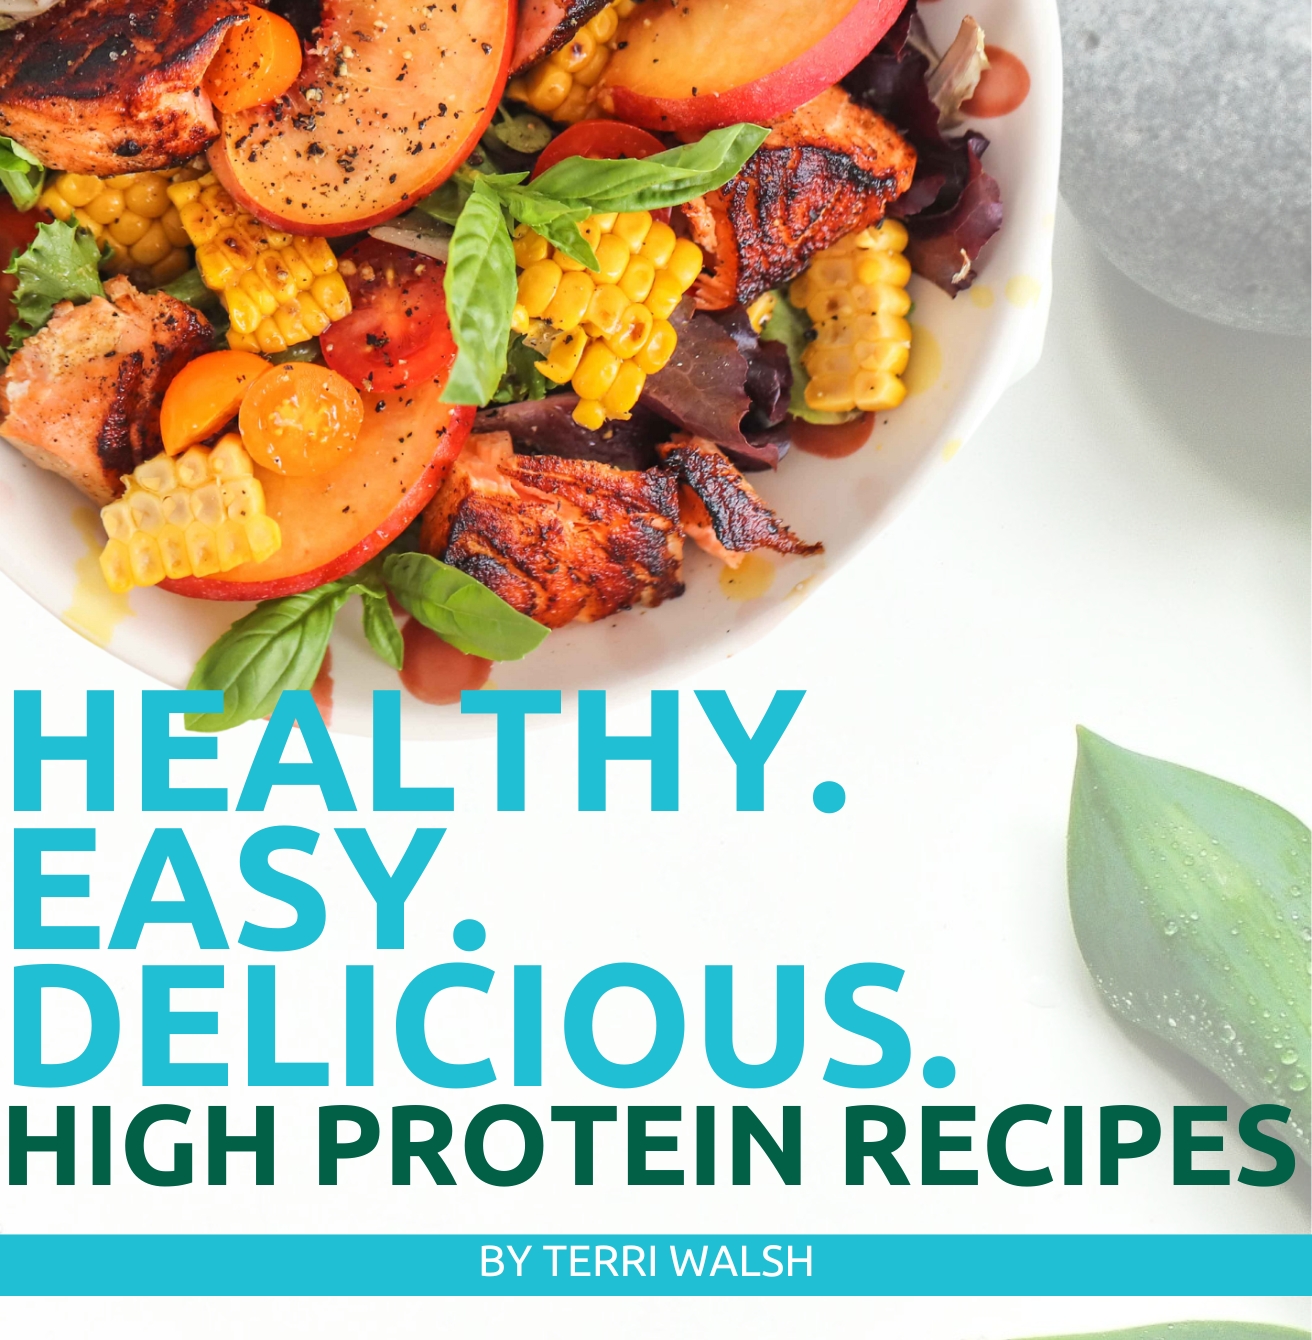 high protein recipes